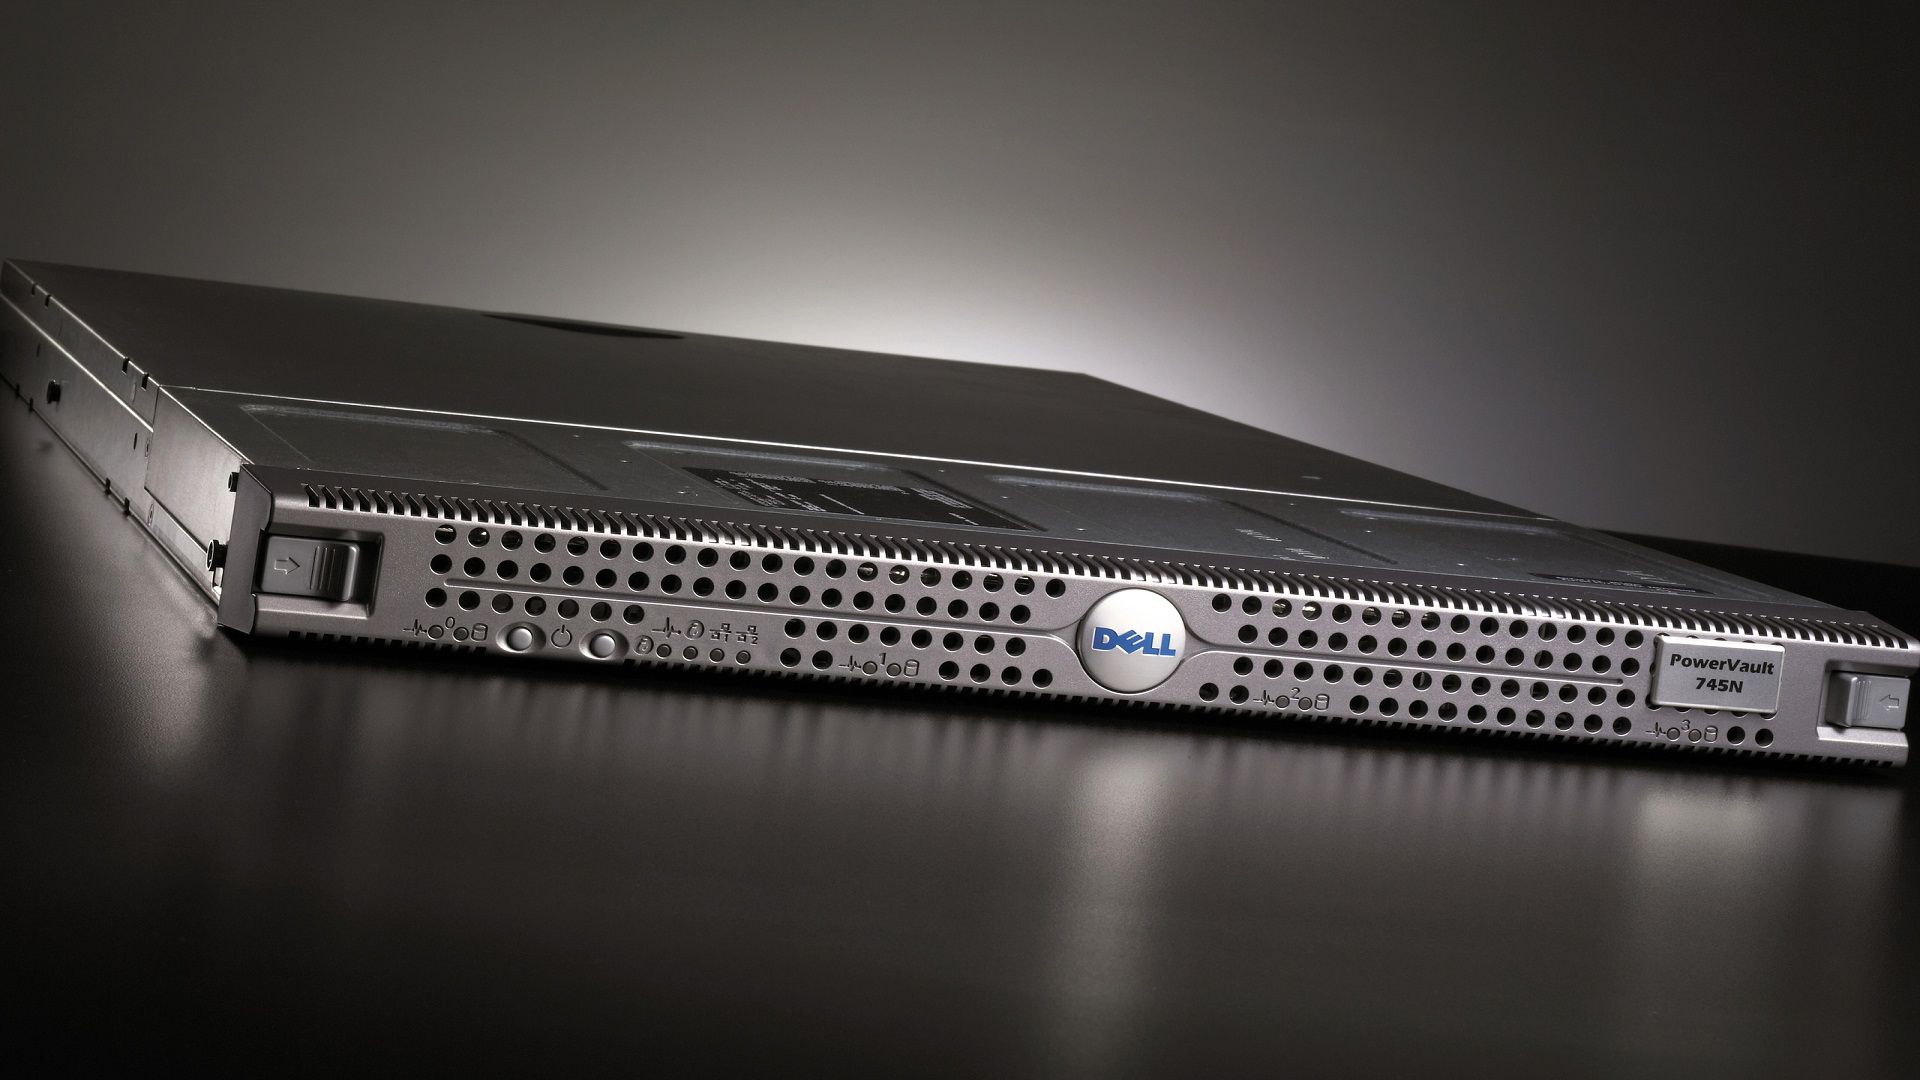 dell power vault server hd wallpaper - Background Wallpapers for ...